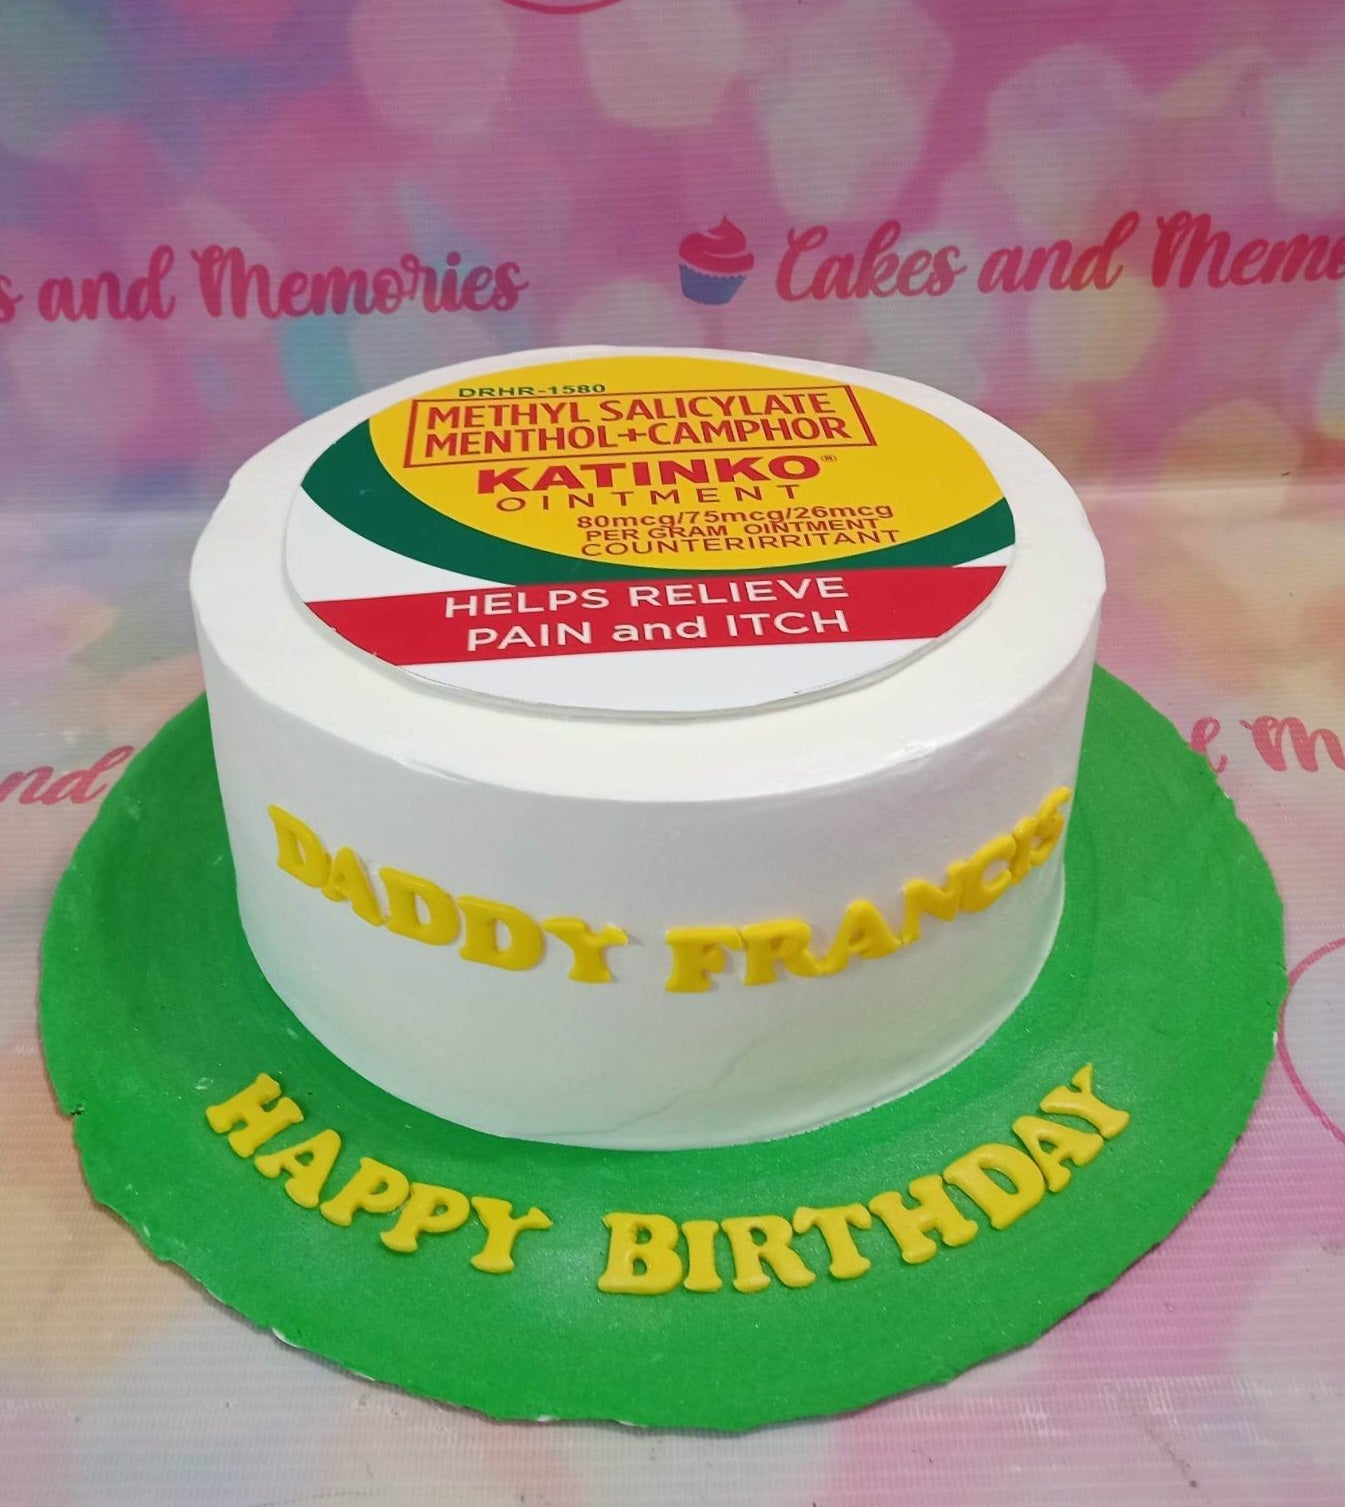 This custom decorated cake is perfect for an 'old' themed event. It features Katinko, Vicks Vaporub, and Mint decorations on a green background. Perfect for celebrating birthdays with seniors like Lolo and Lola. Made with high quality materials, this cake will last even during a gym session or exercise!